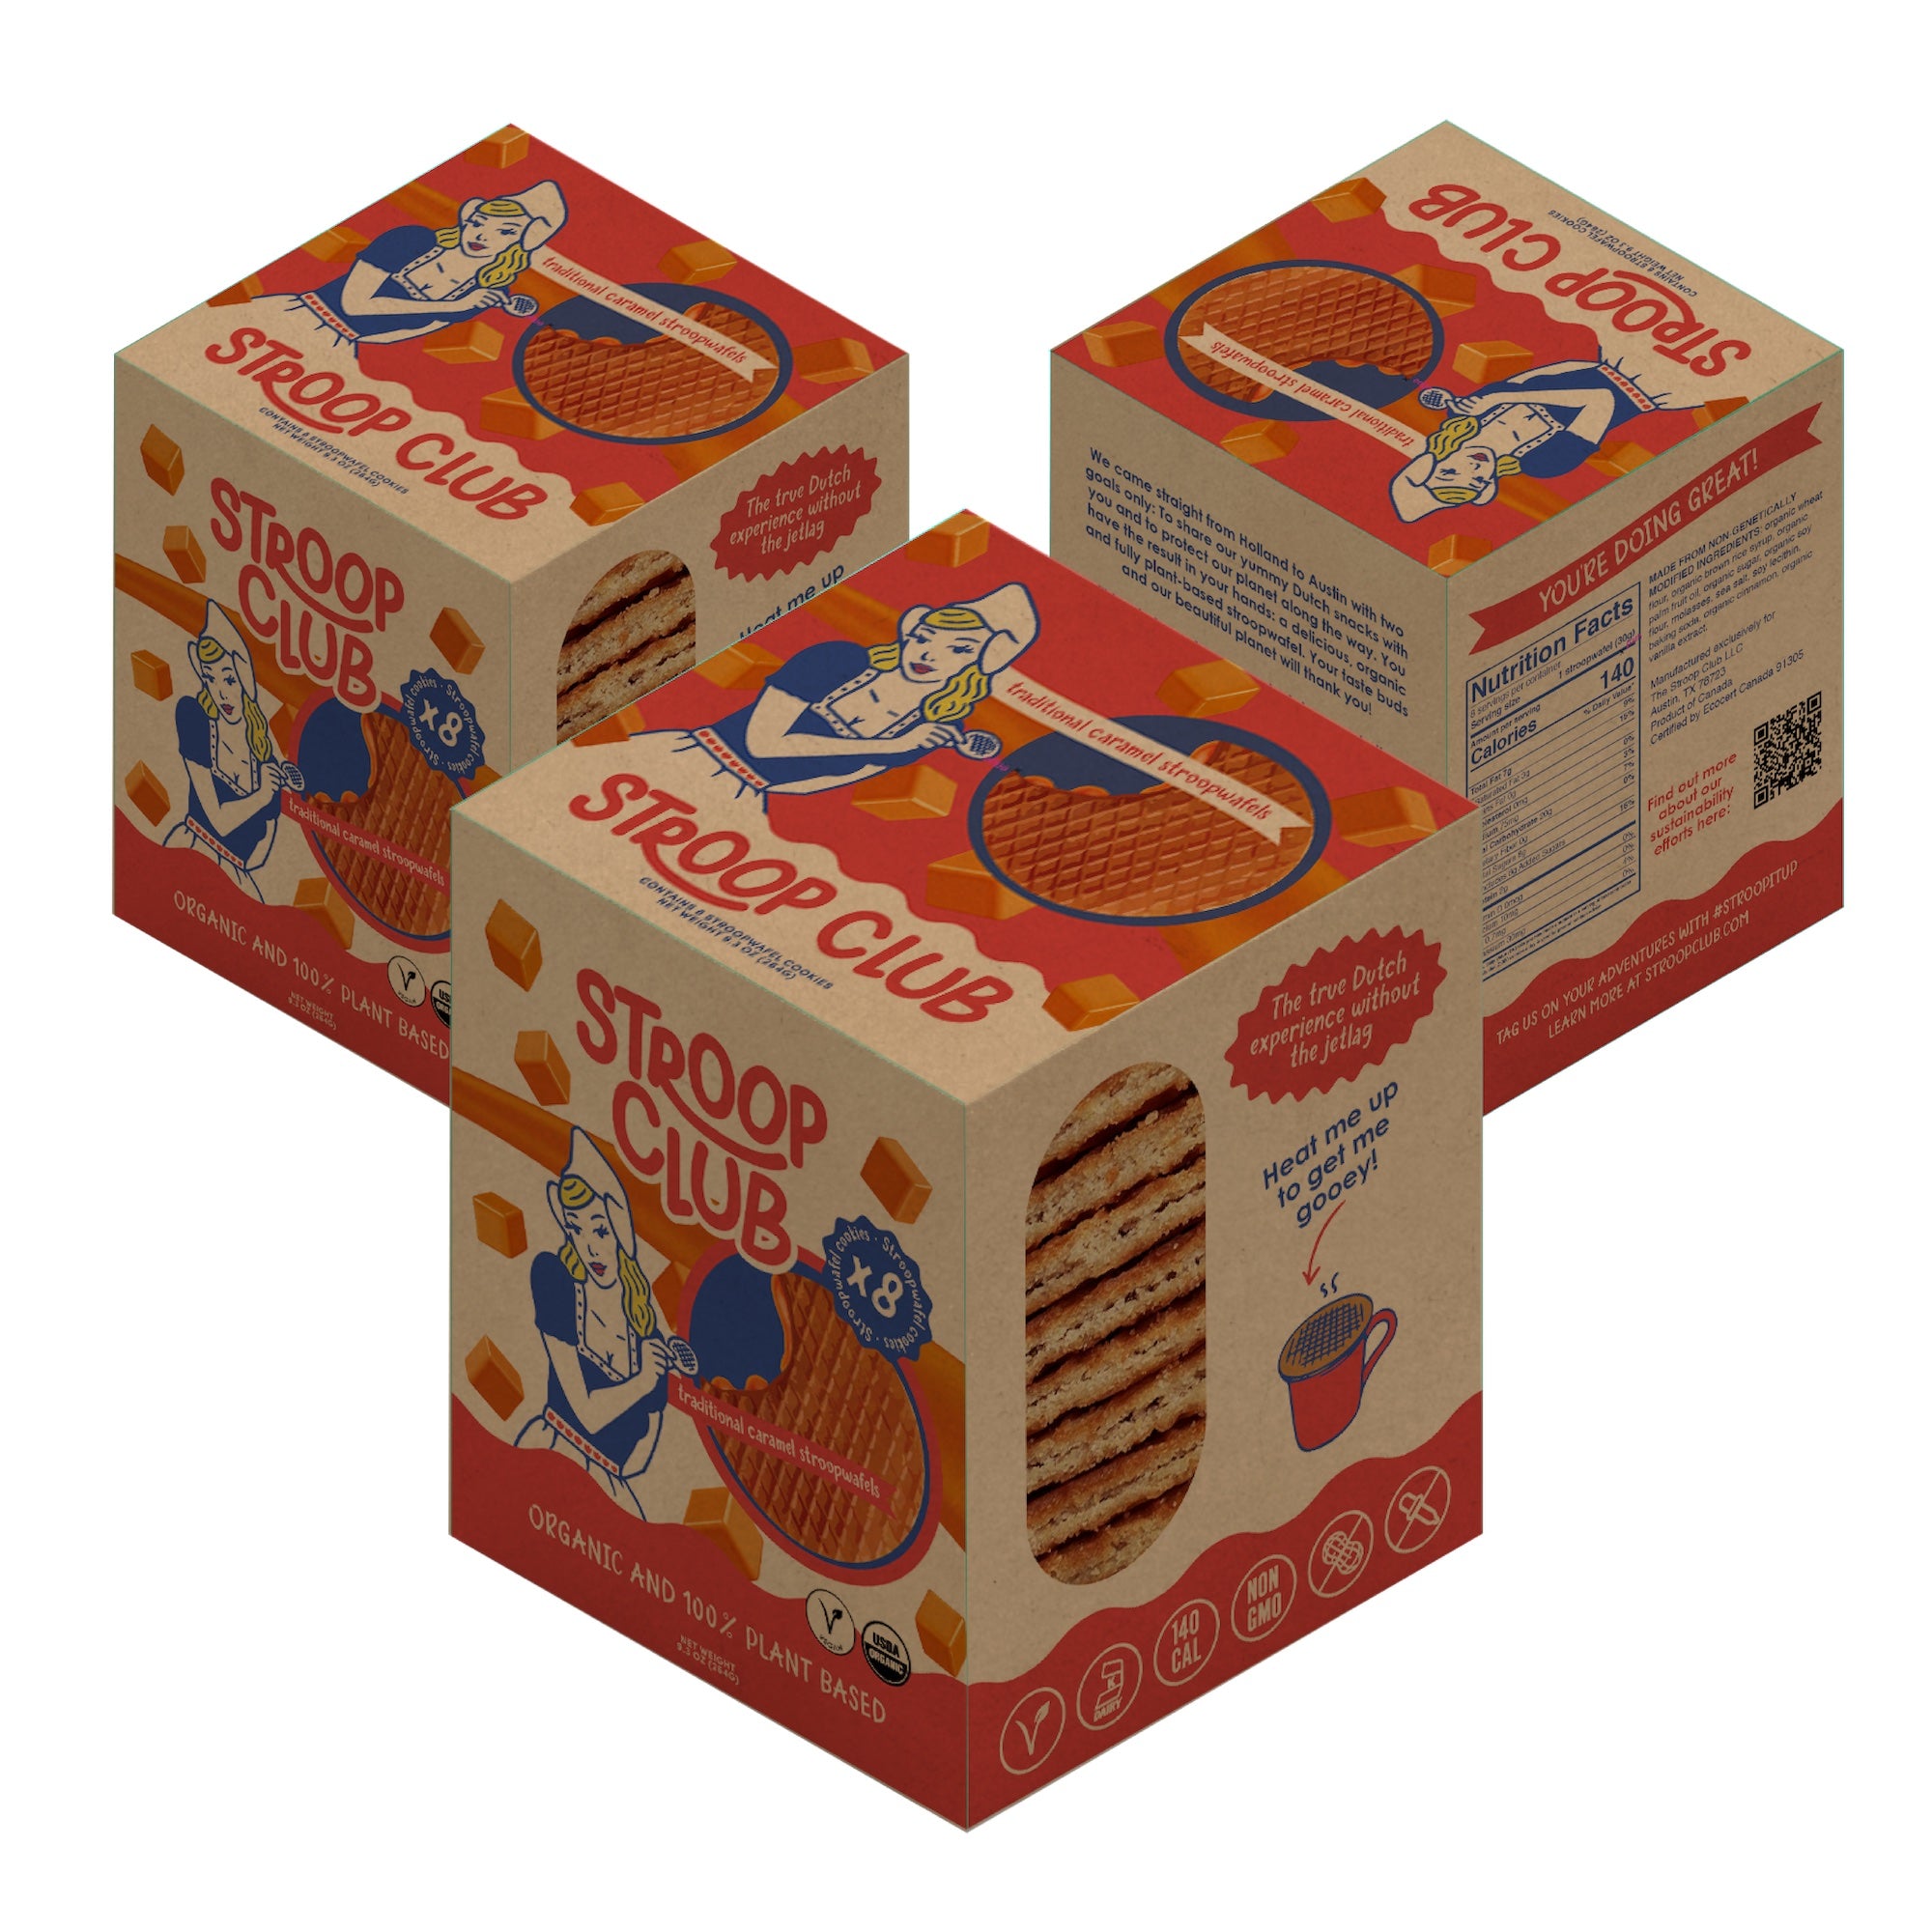 Traditional Caramel Plant Based and Organic Stroopwafel 3x 8-pack (24 total)